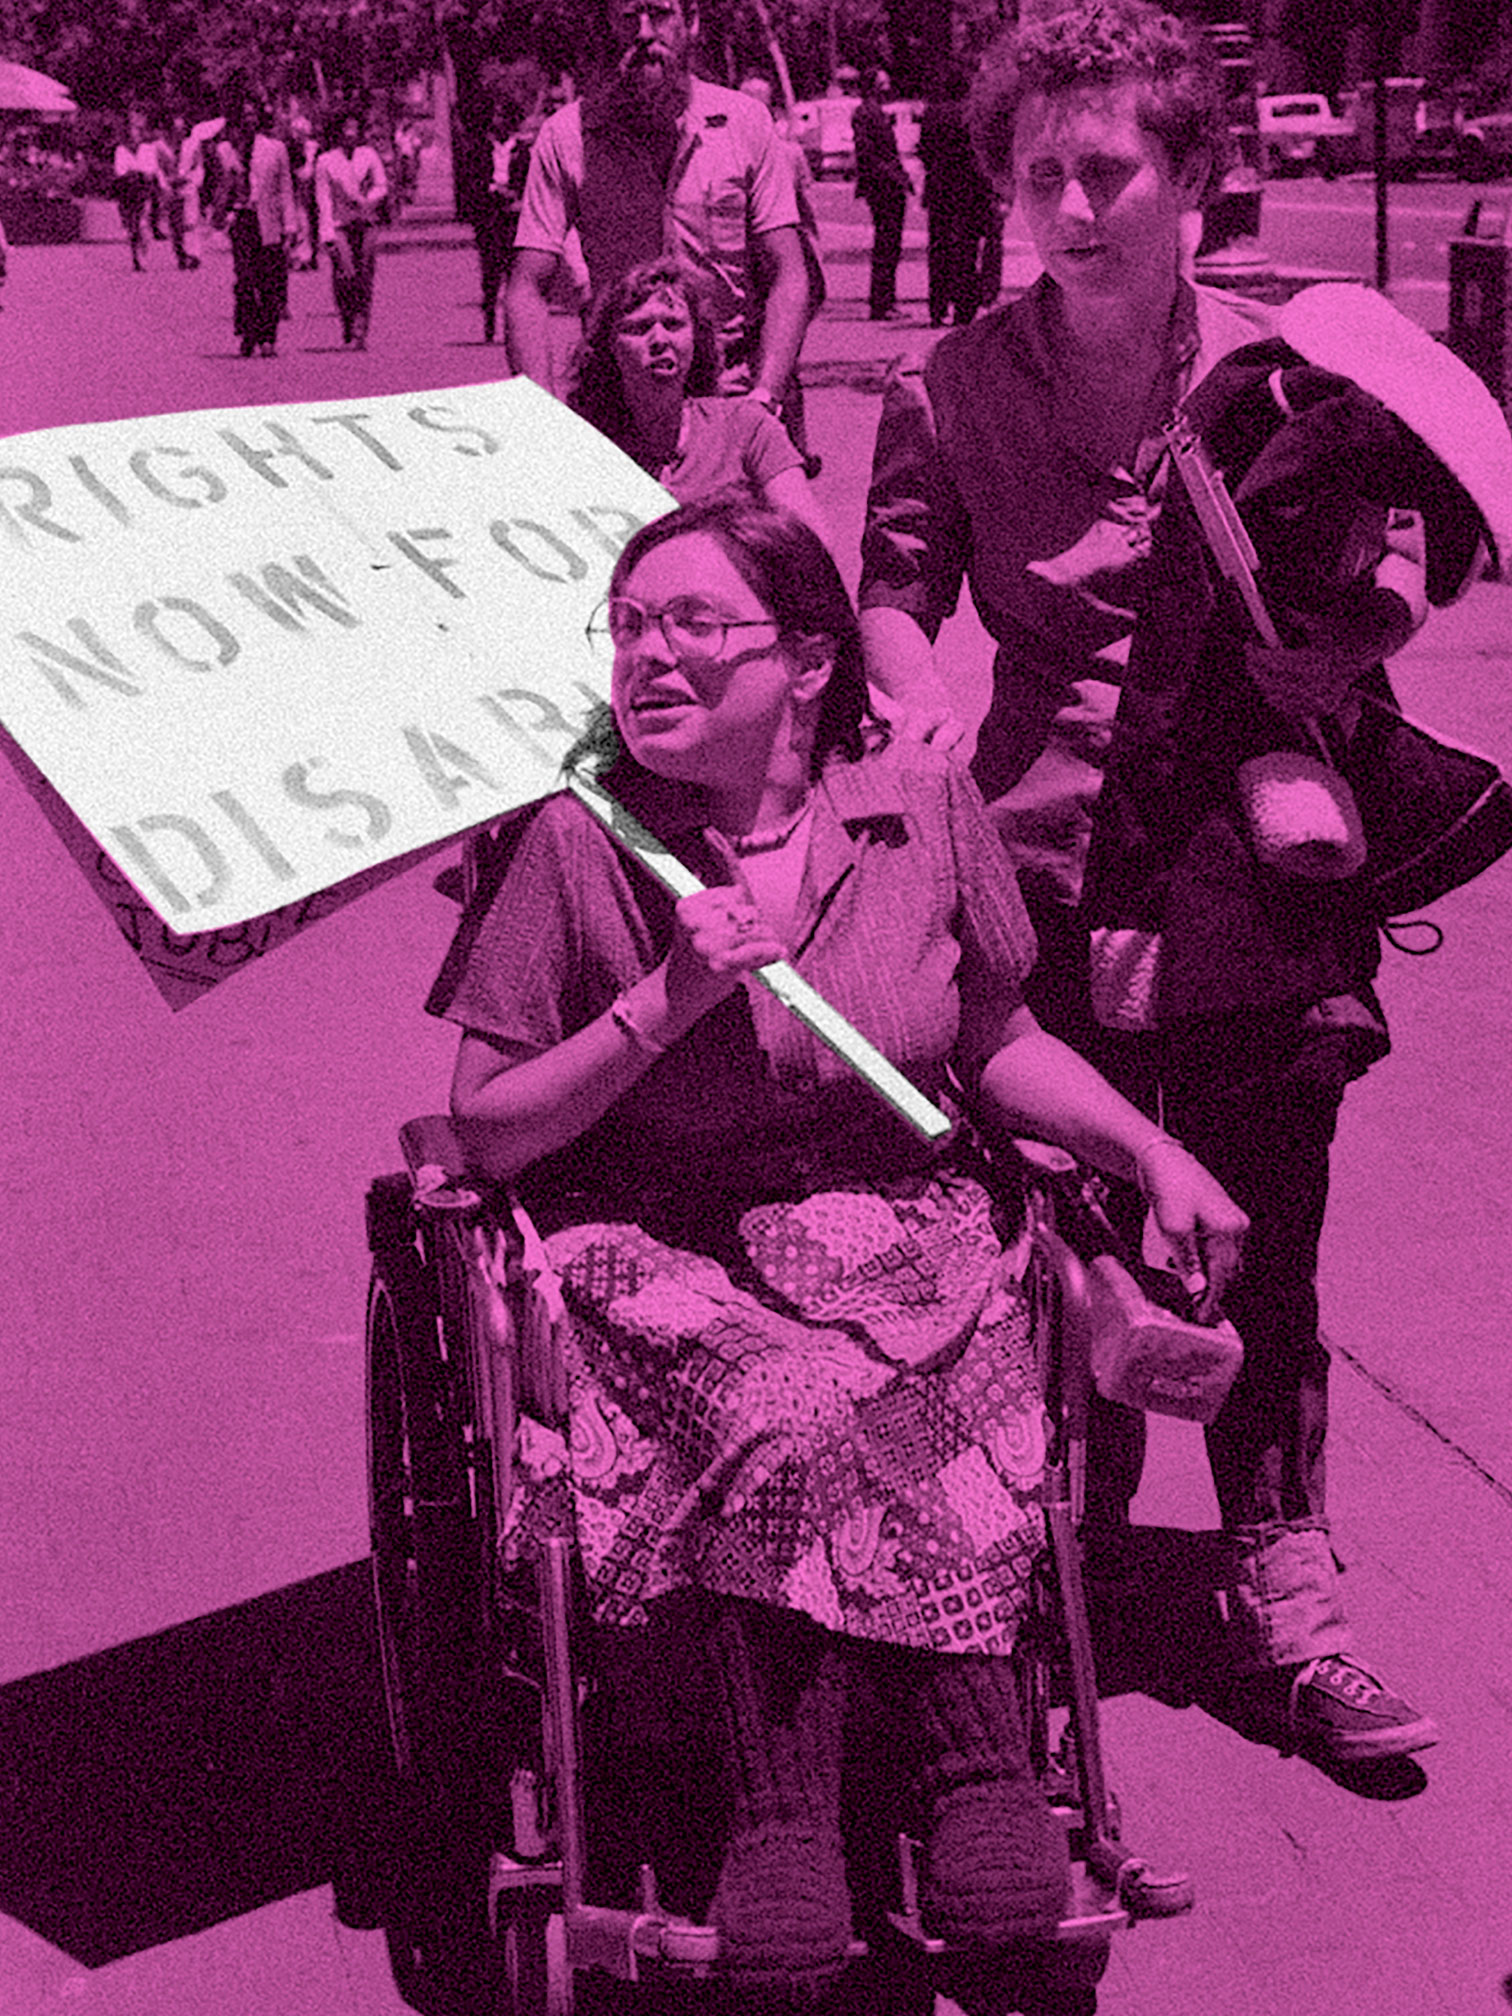 Judy Heumann attends a disability rights protest. She uses a wheelchair and holds a sign that reads “RIGHTS NOW FOR DISABLED.” The image is filtered in neon pink, while the sign remains filtered black and white.